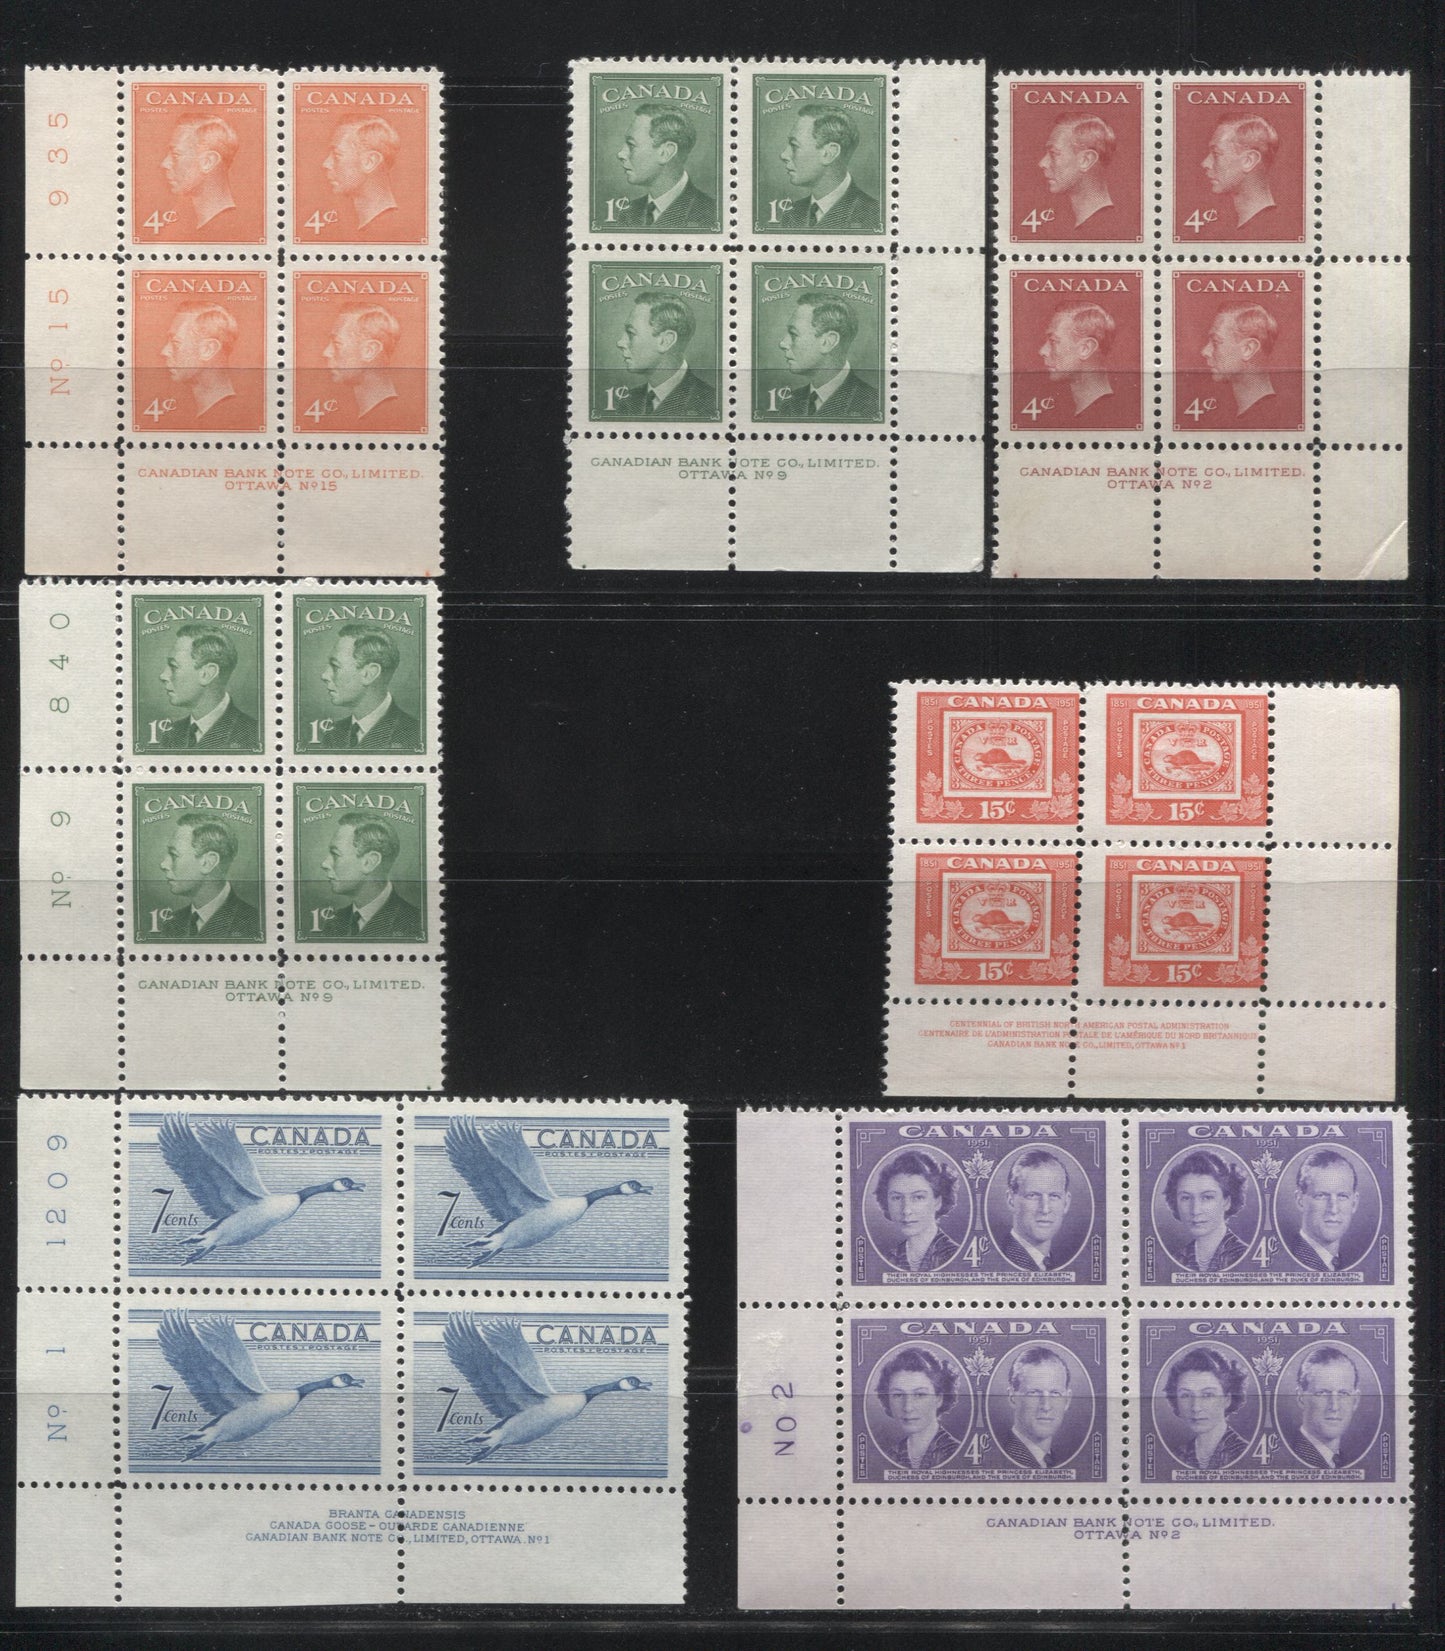 Lot 103 Canada #284, 287, 306, 314-315, 320 1c - 15c Green - Bright Red King George VI - Canada Goose, 1949-1952 Postes-Postage & Commemoratives, 7 Fine NH and VFNH LL & LR Plate 1,2, 9 & 17 Blocks Of 4